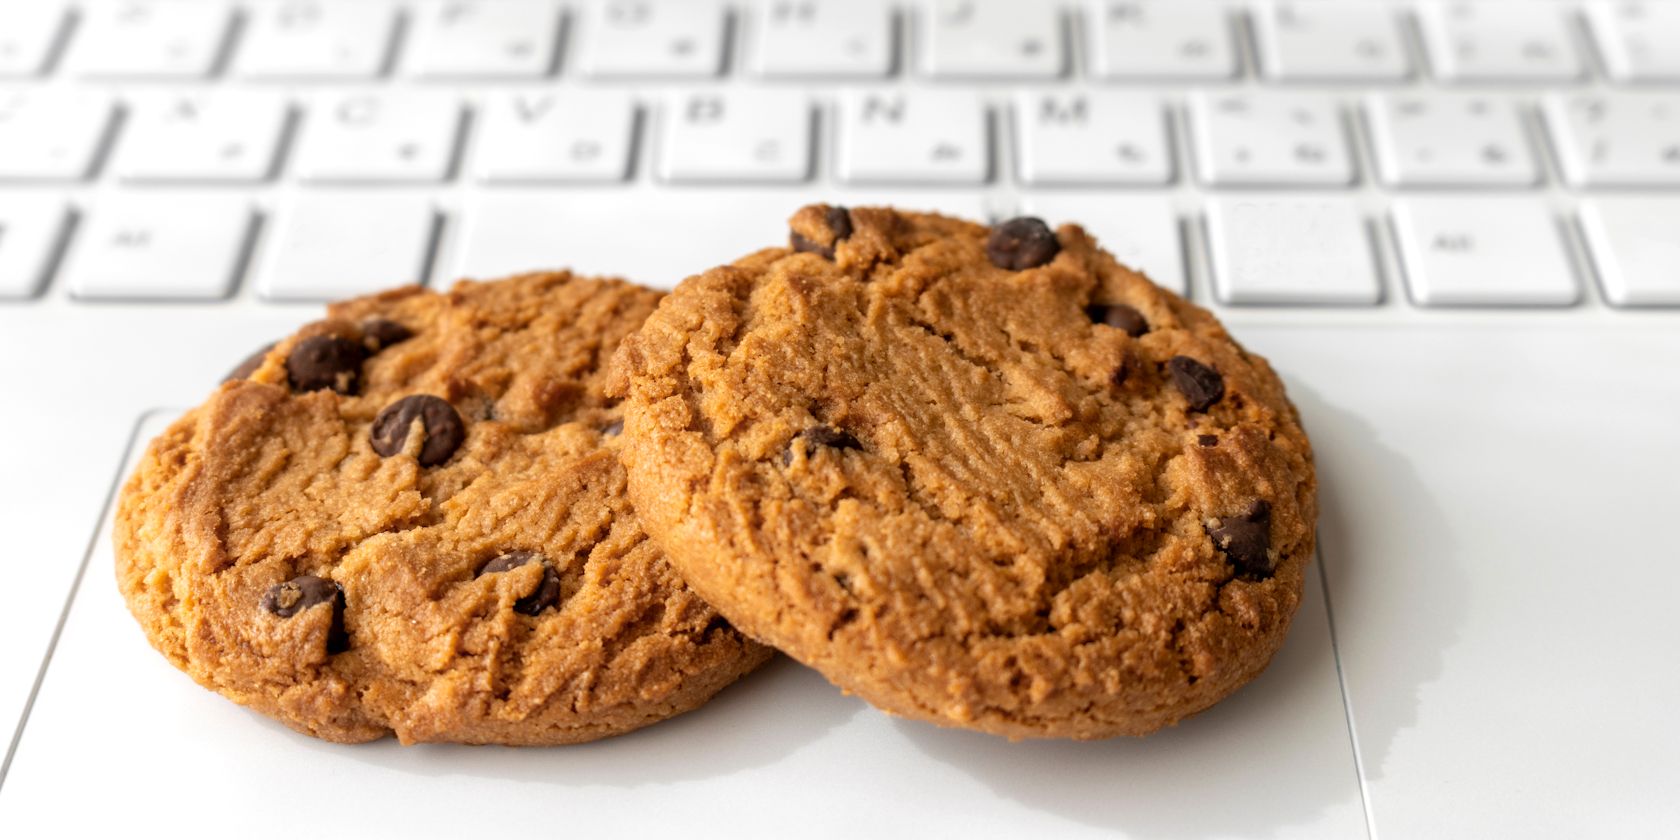 cookies sitting on a white keyboard feature